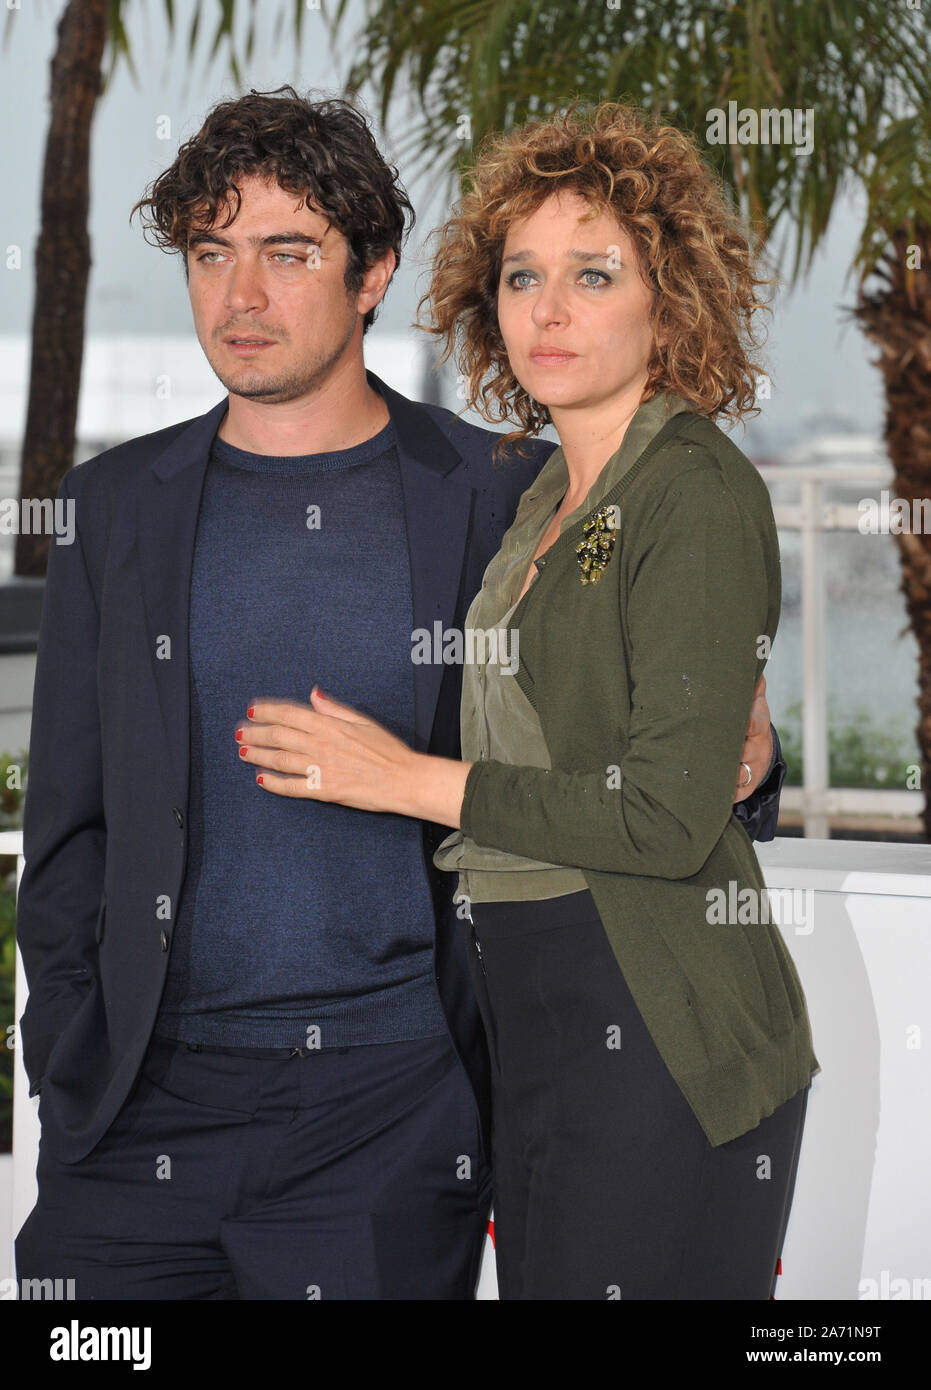 CANNES, FRANCE. May 18, 2013: Valeria Golino & Riccardo Scamarcio at photocall for their movie 'Miele' at the 66th Festival de Cannes. © 2013 Paul Smith / Featureflash Stock Photo